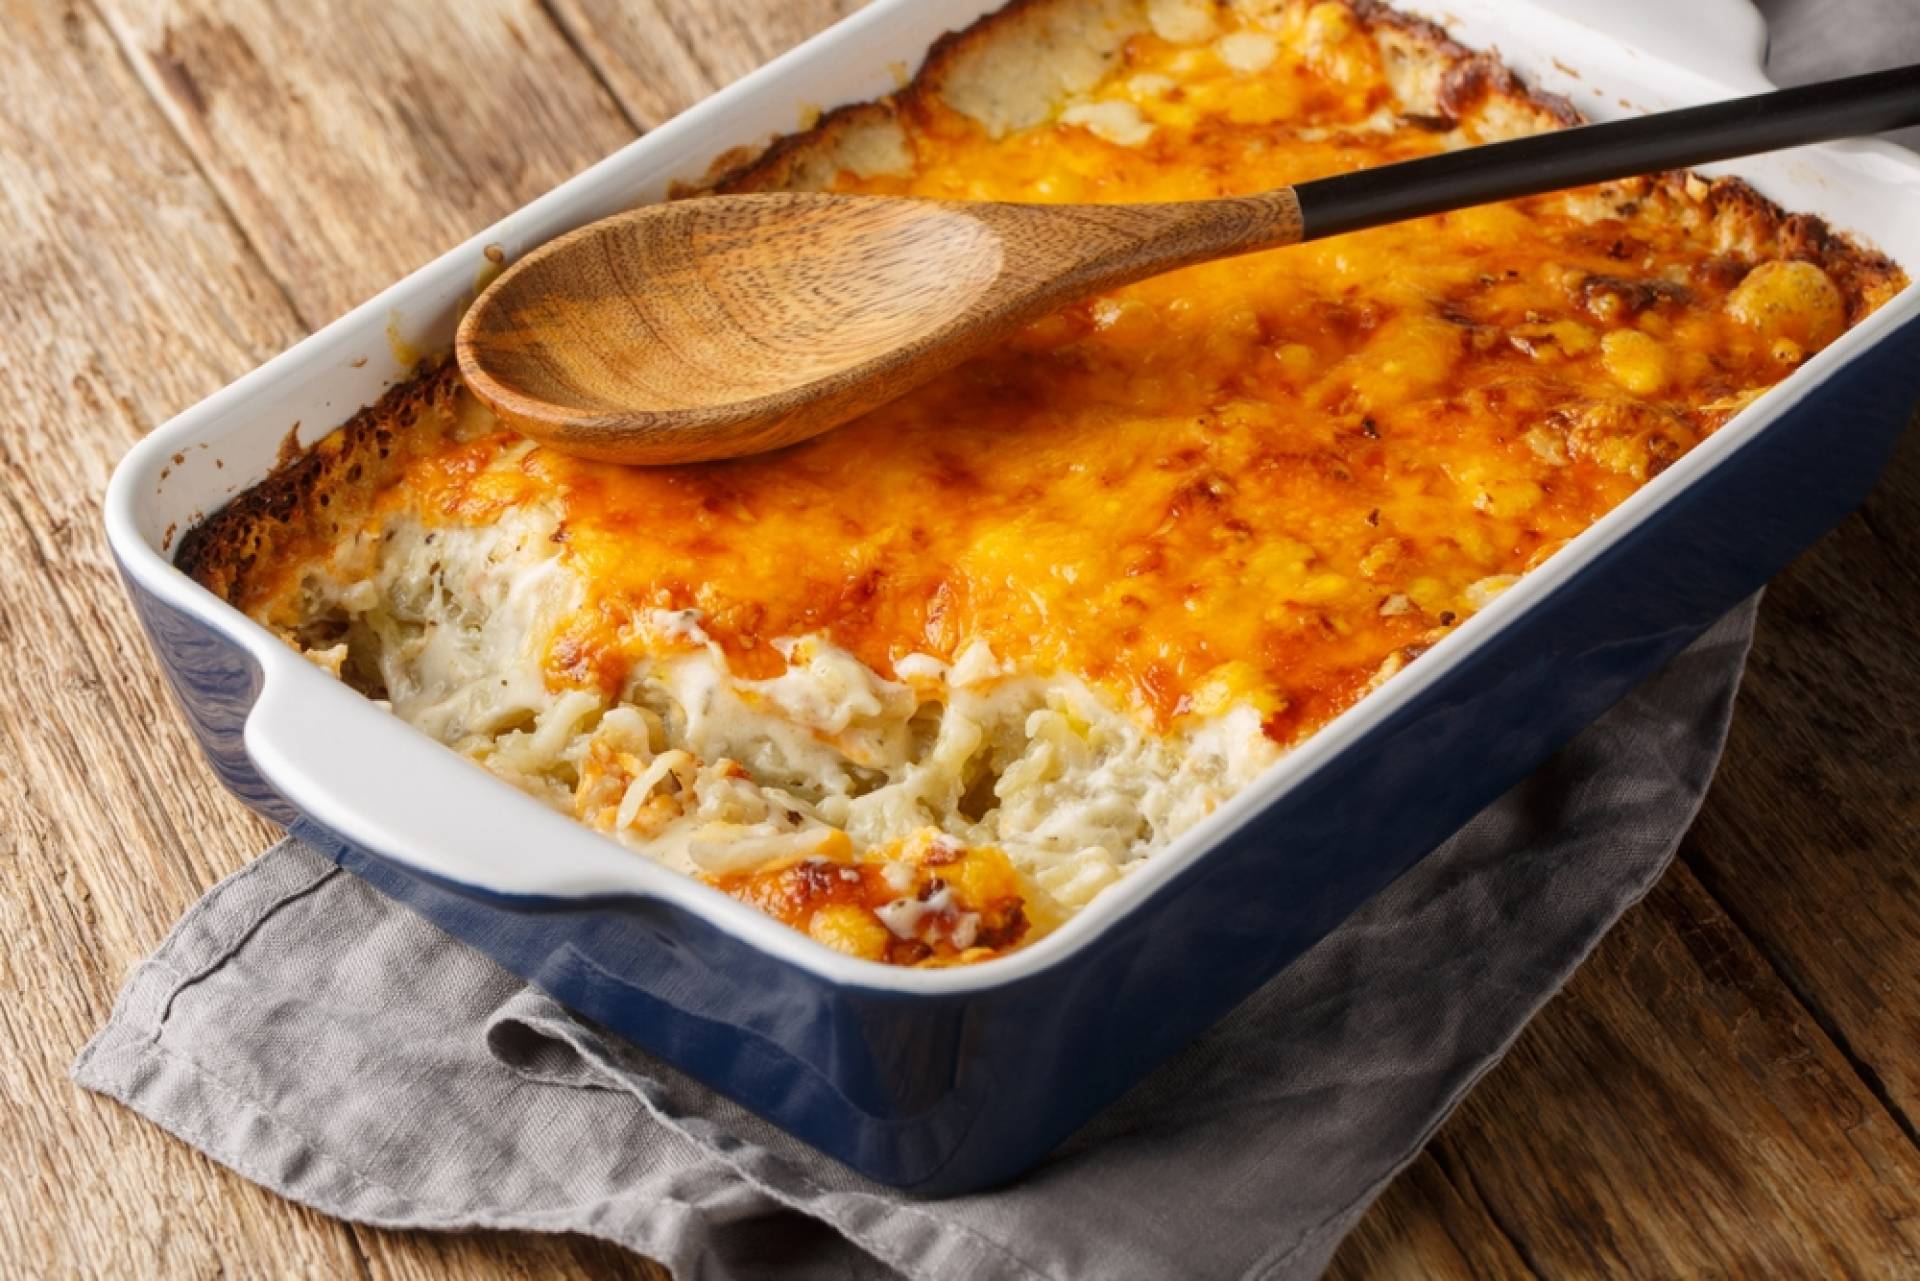 Sausage and Hashbrown Casserole